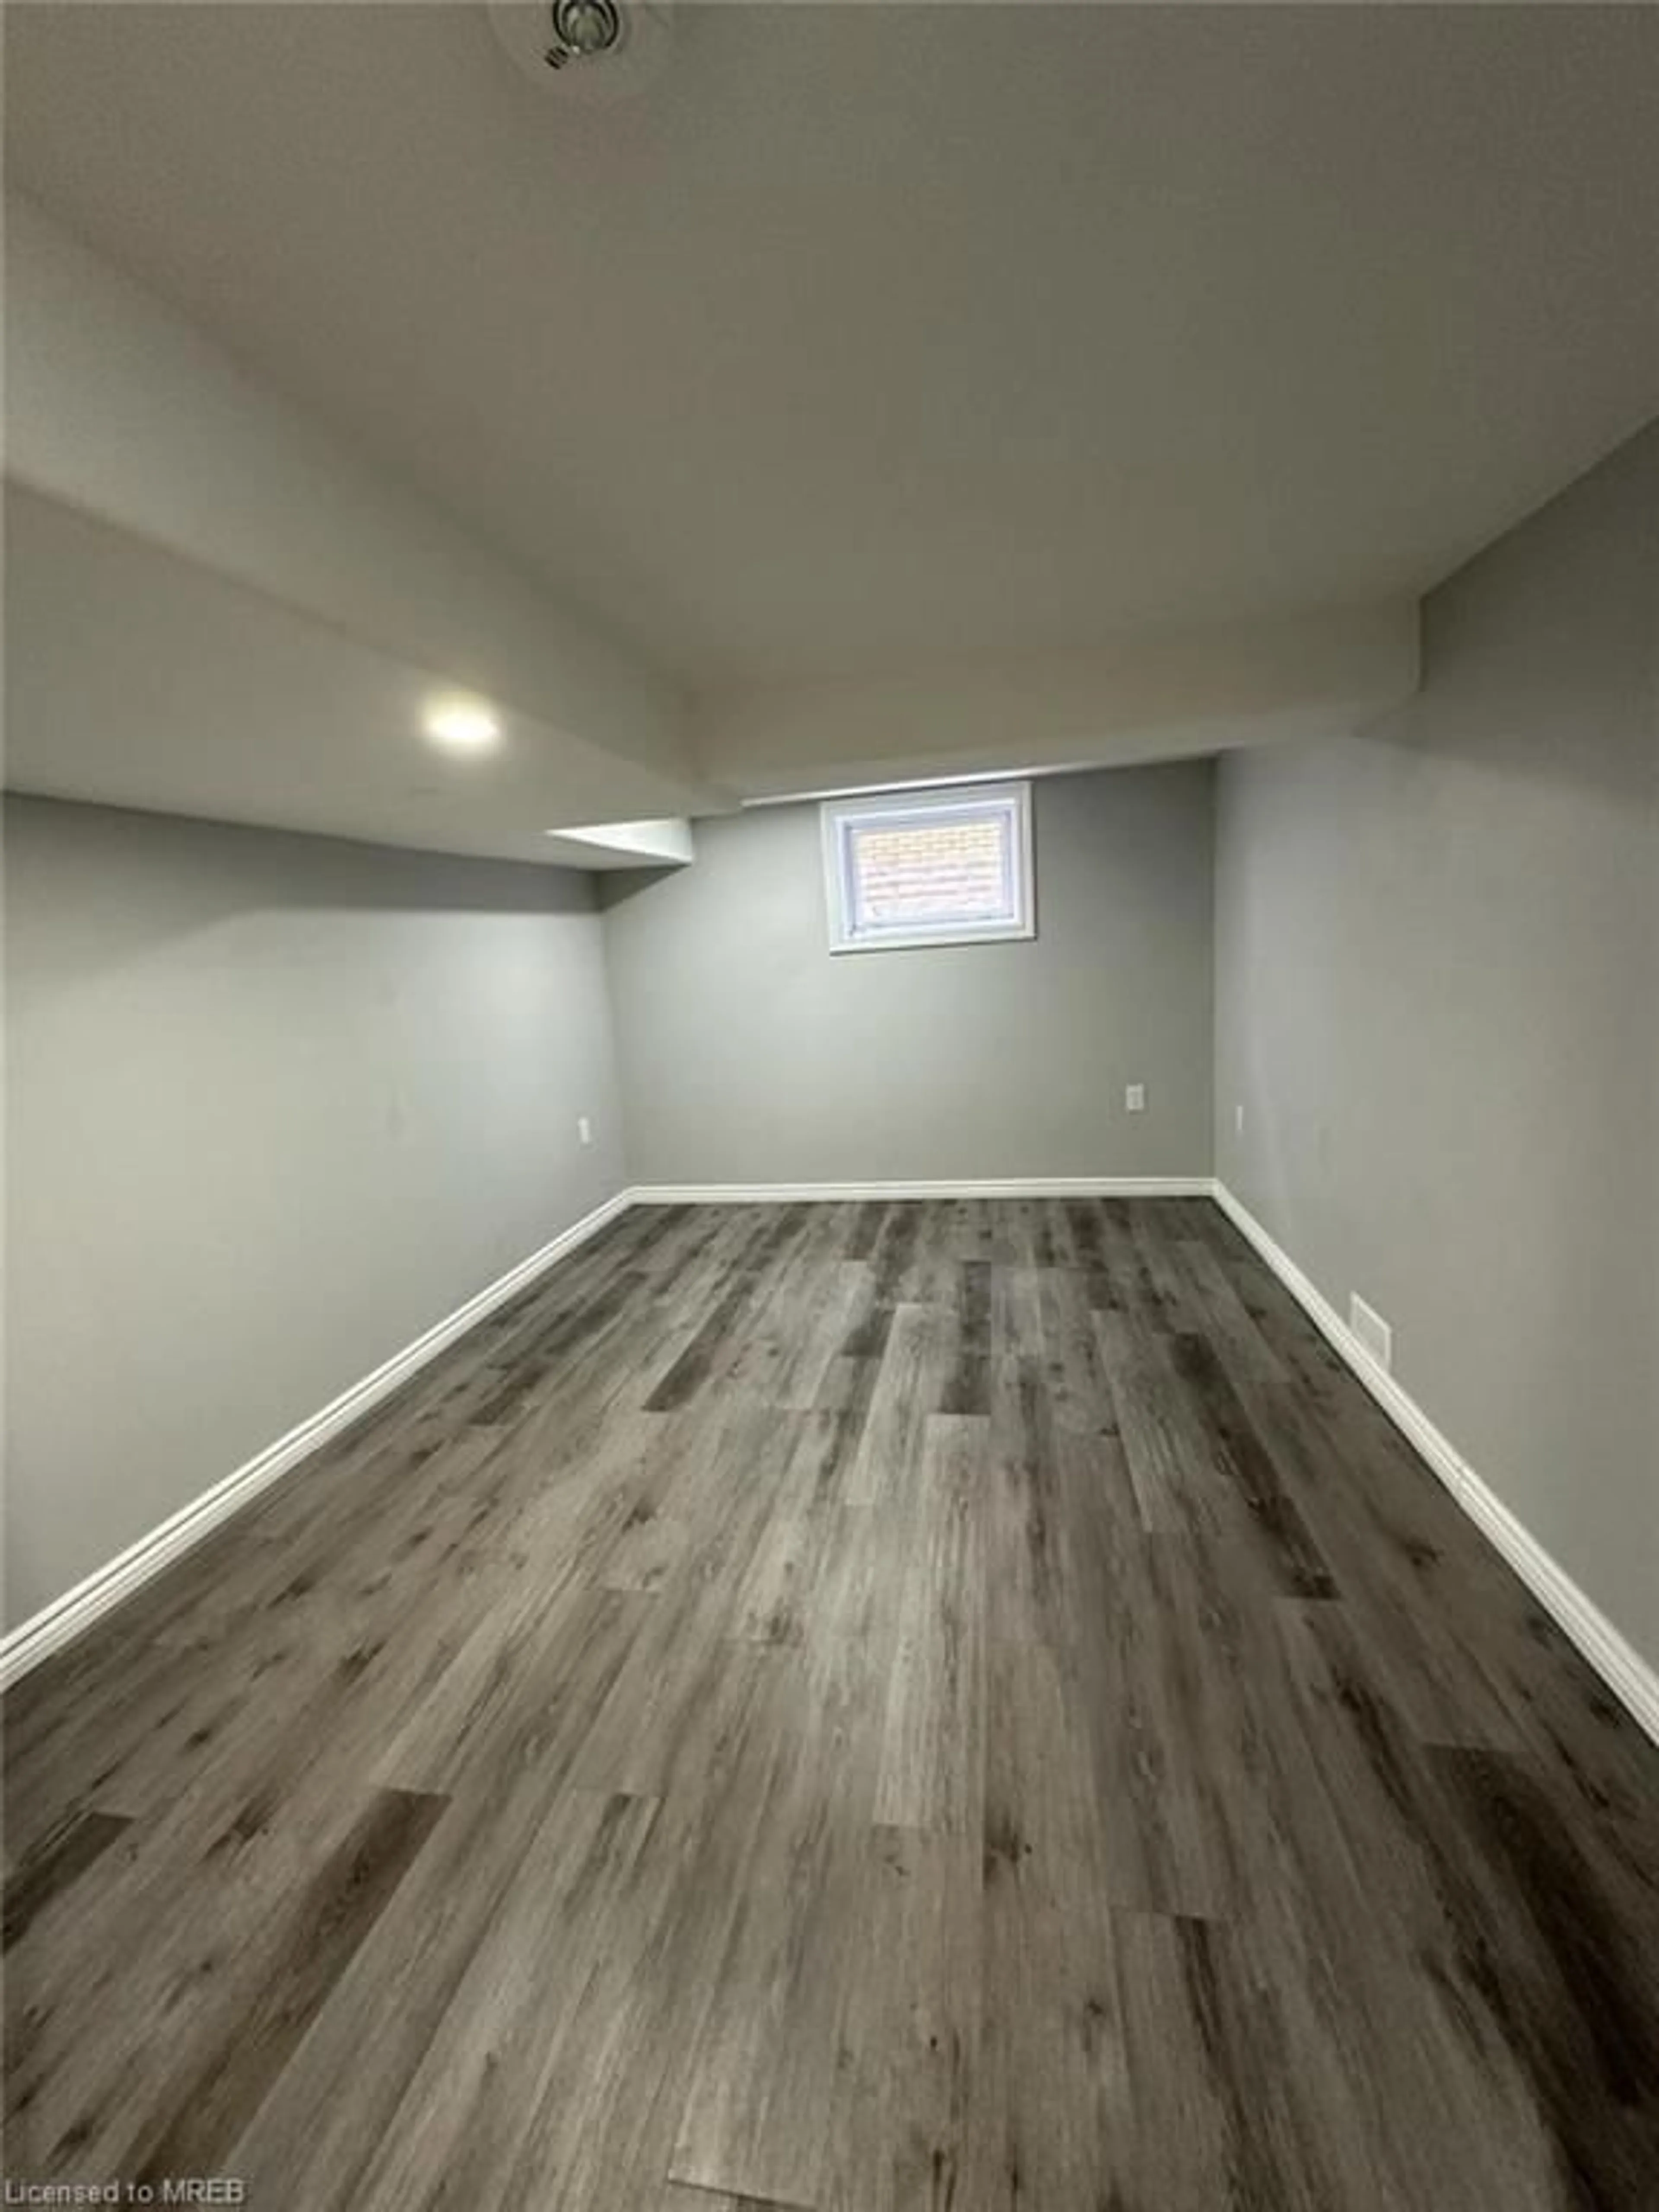 Storage room or clothes room or walk-in closet for 75 Wilfred Ave, Kitchener Ontario N2A 1W9